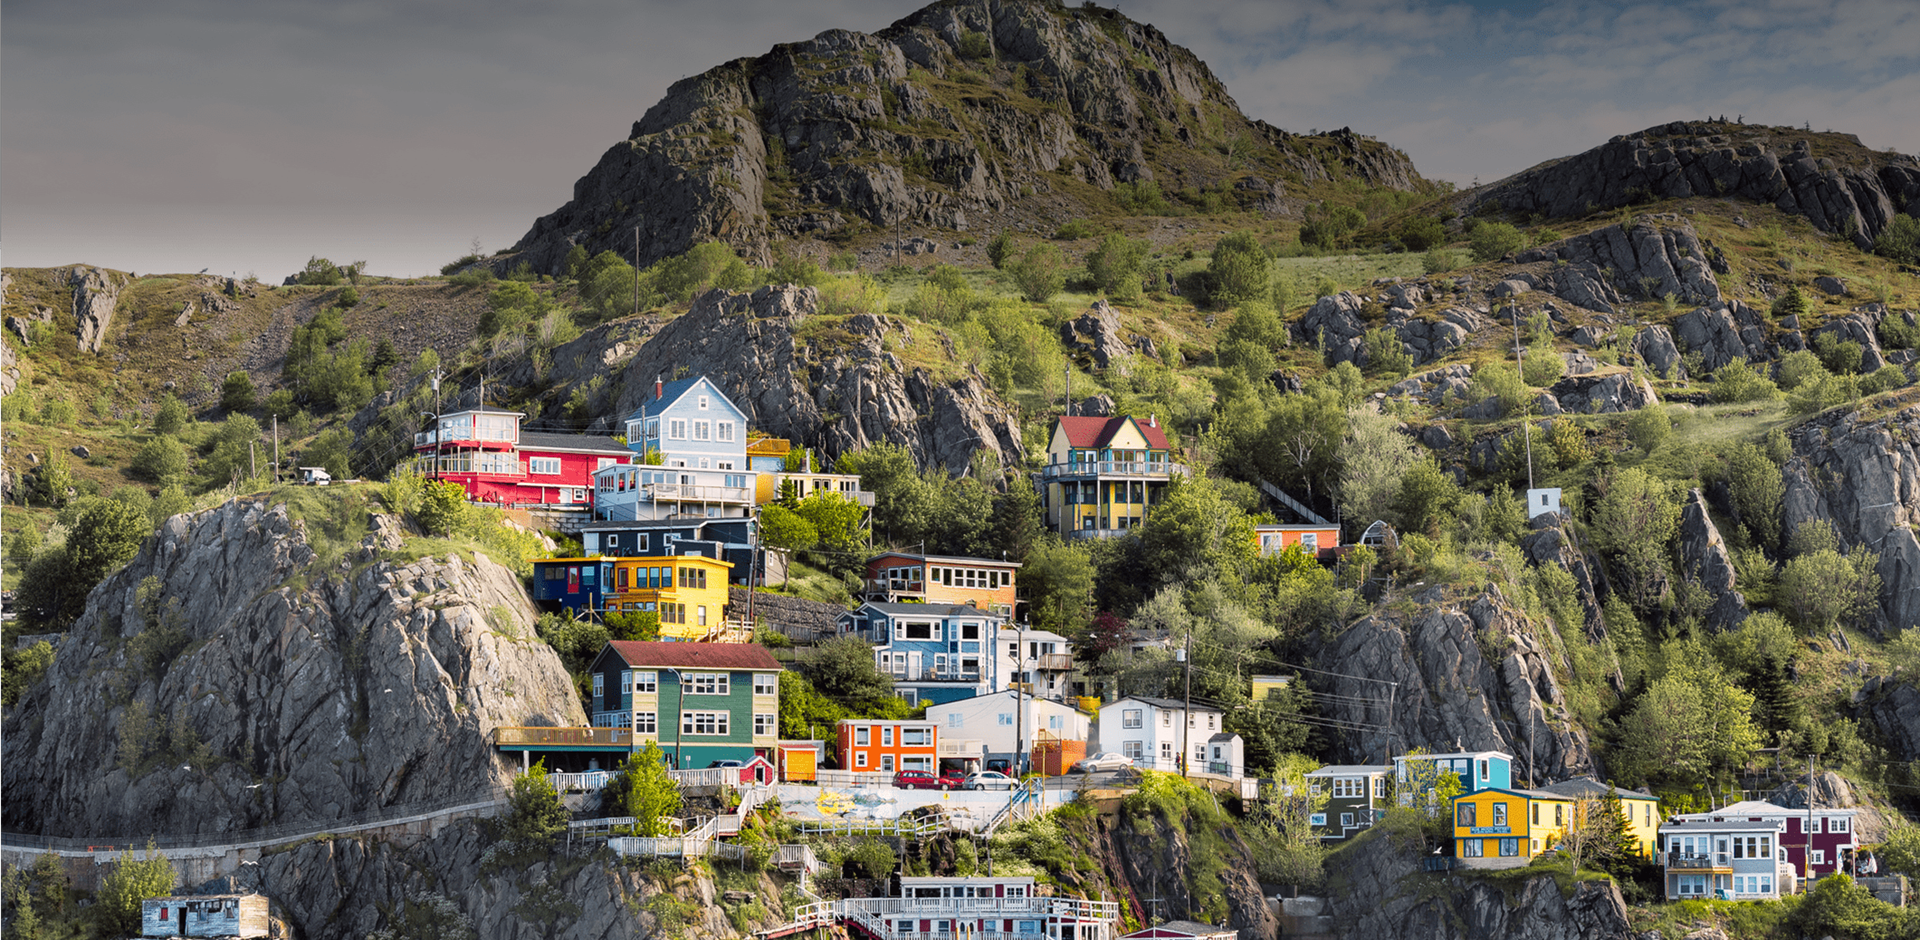 View Of Sea And Mountains with bright houses on rocky hills in St. John's, Canada